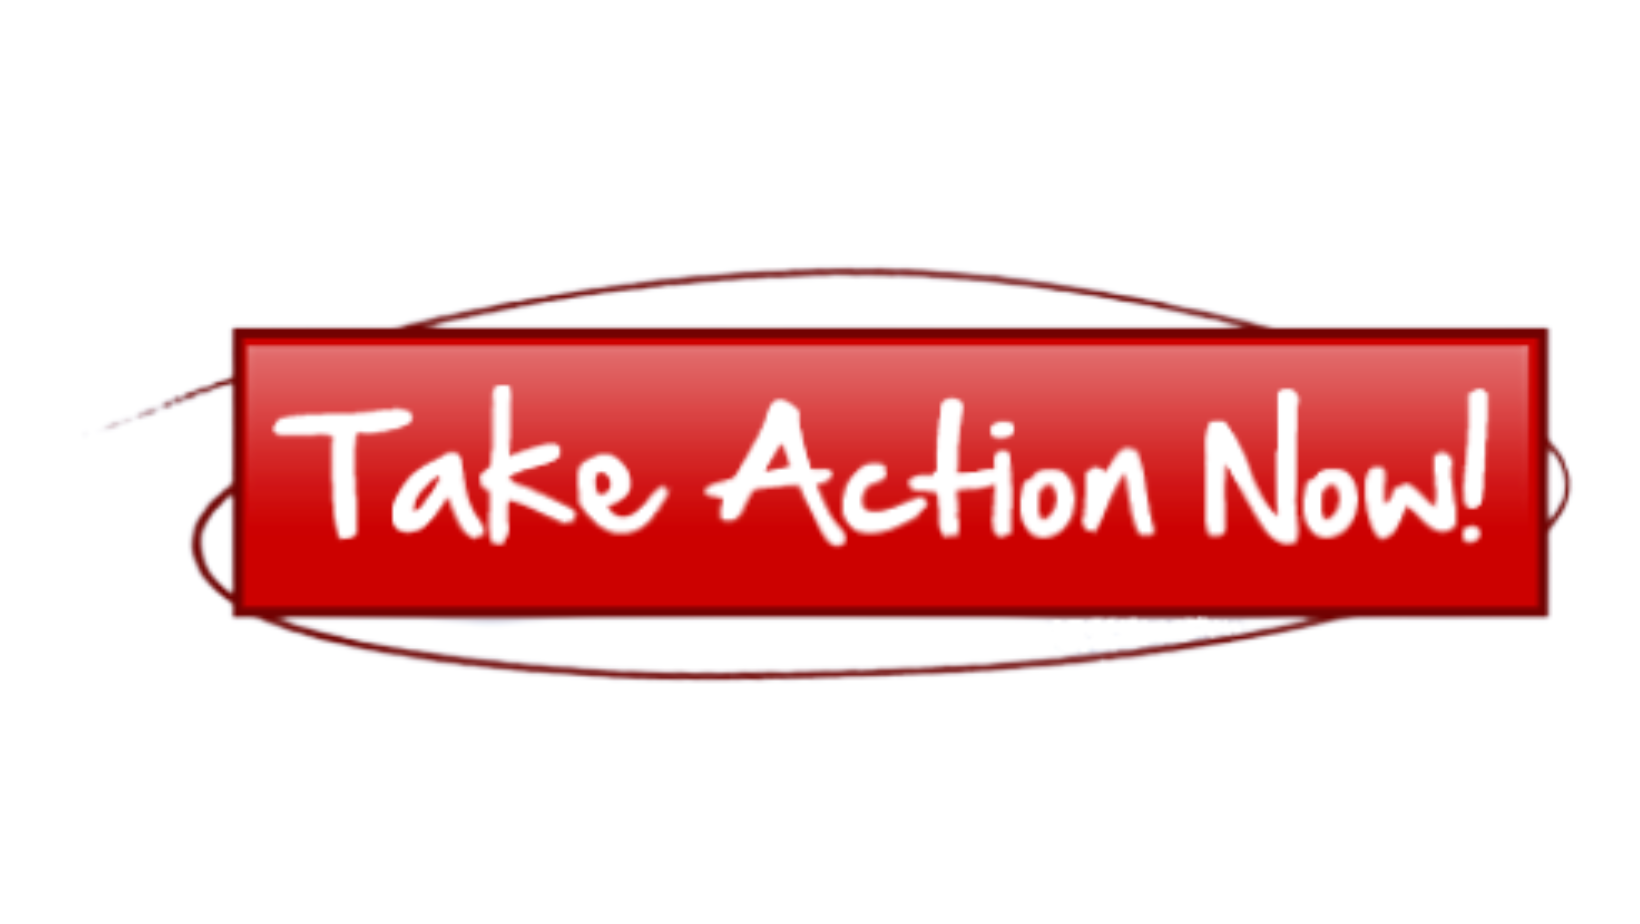 Red Box with White Text "Take Action Now!"